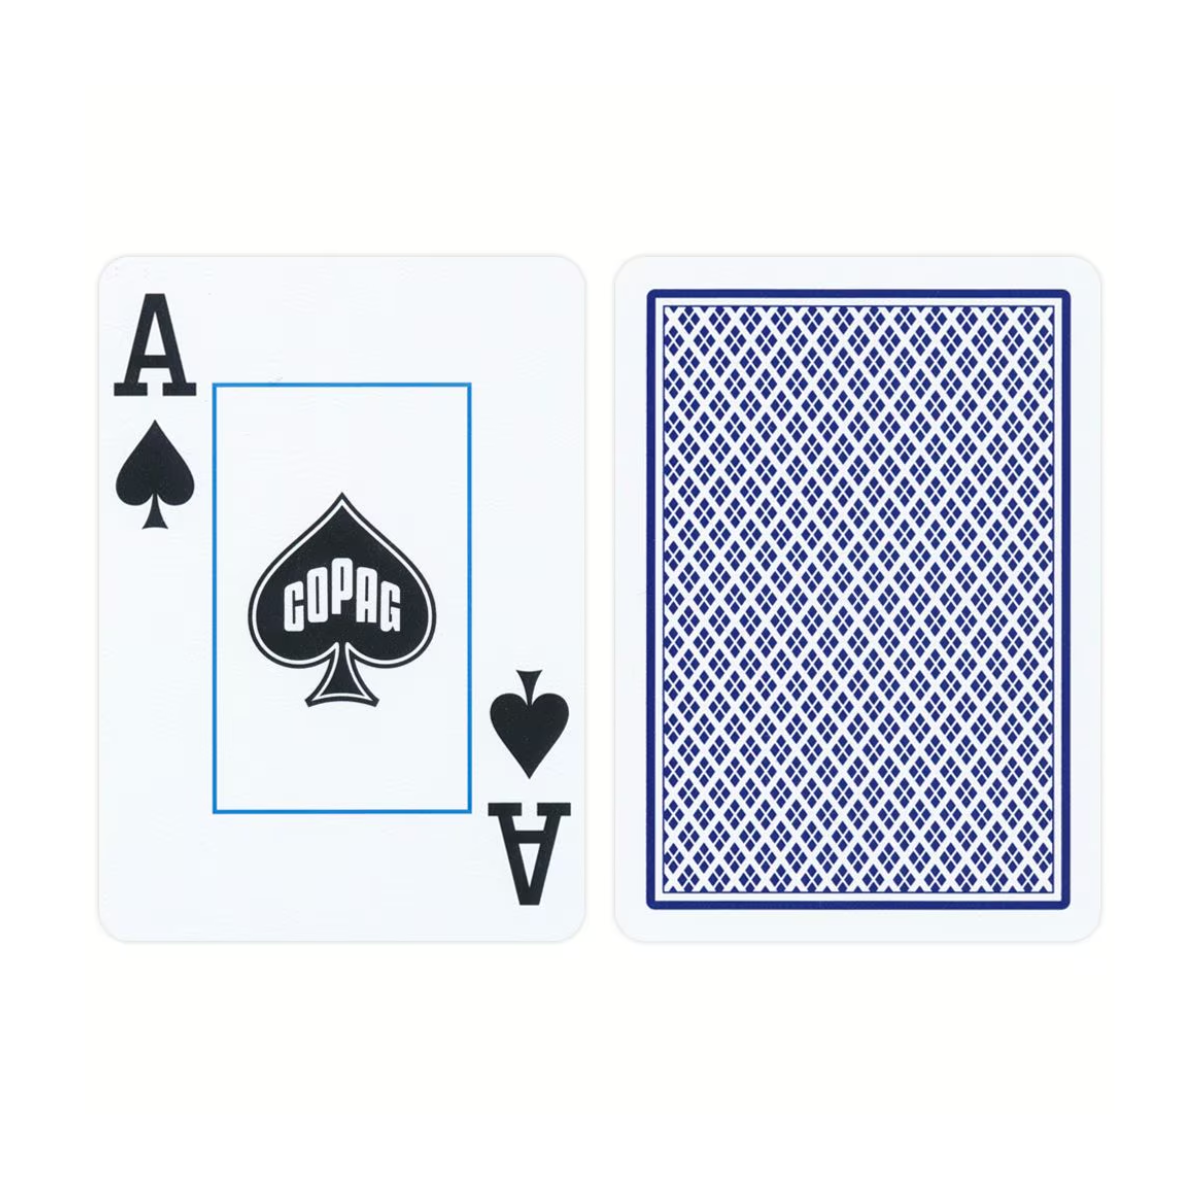 Copag Brick of Playing Cards 2 Jumbo Index-Blue-Copag-Ace Cards &amp; Collectibles